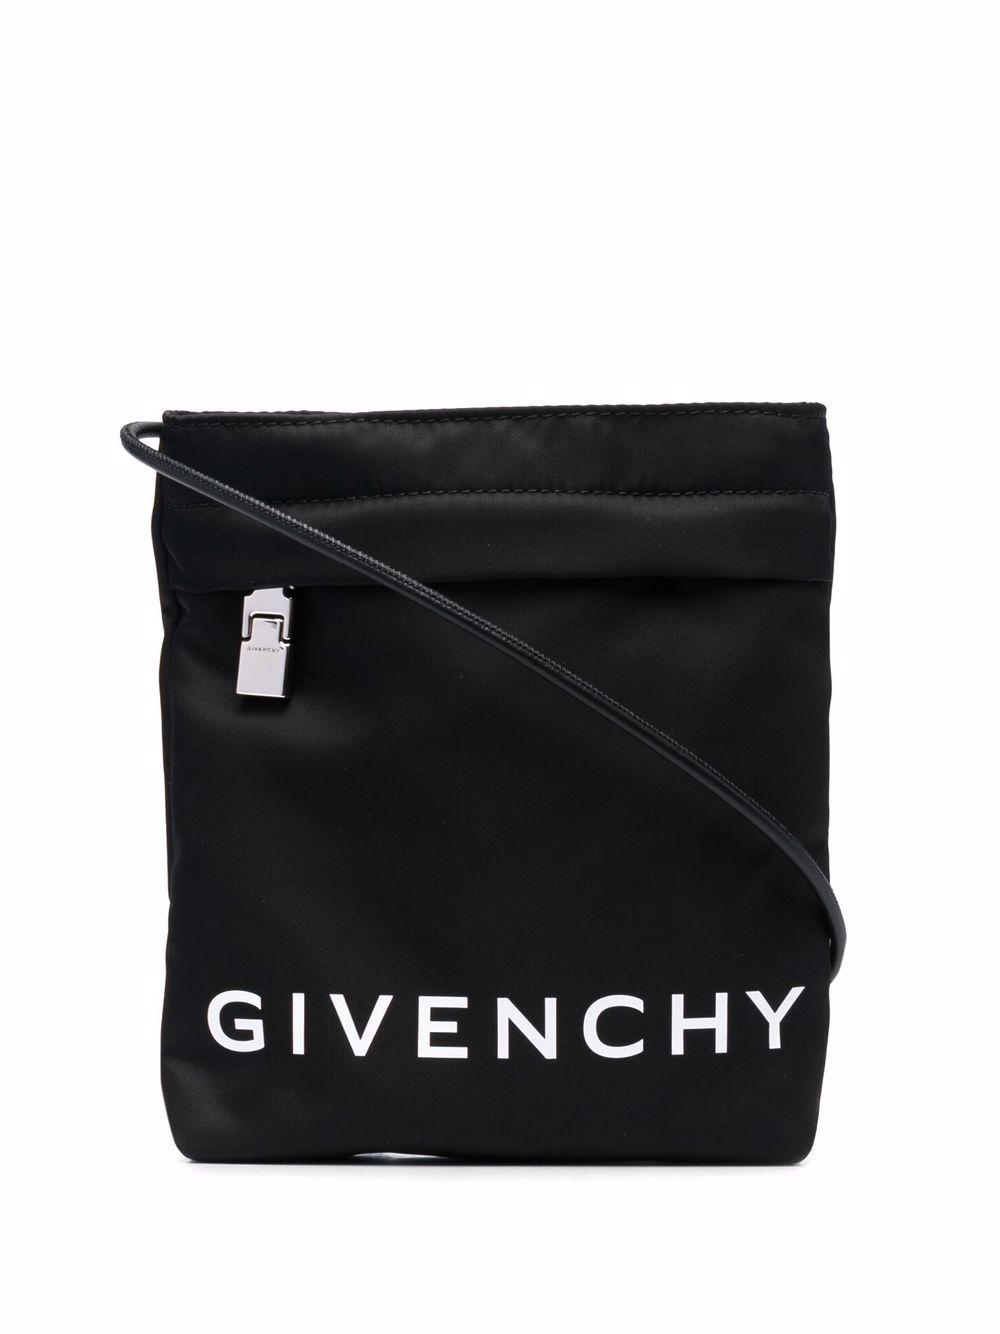 Save 11% Mens Pouches and wristlets Givenchy Pouches and wristlets Givenchy Canvas Clutch in Black for Men 